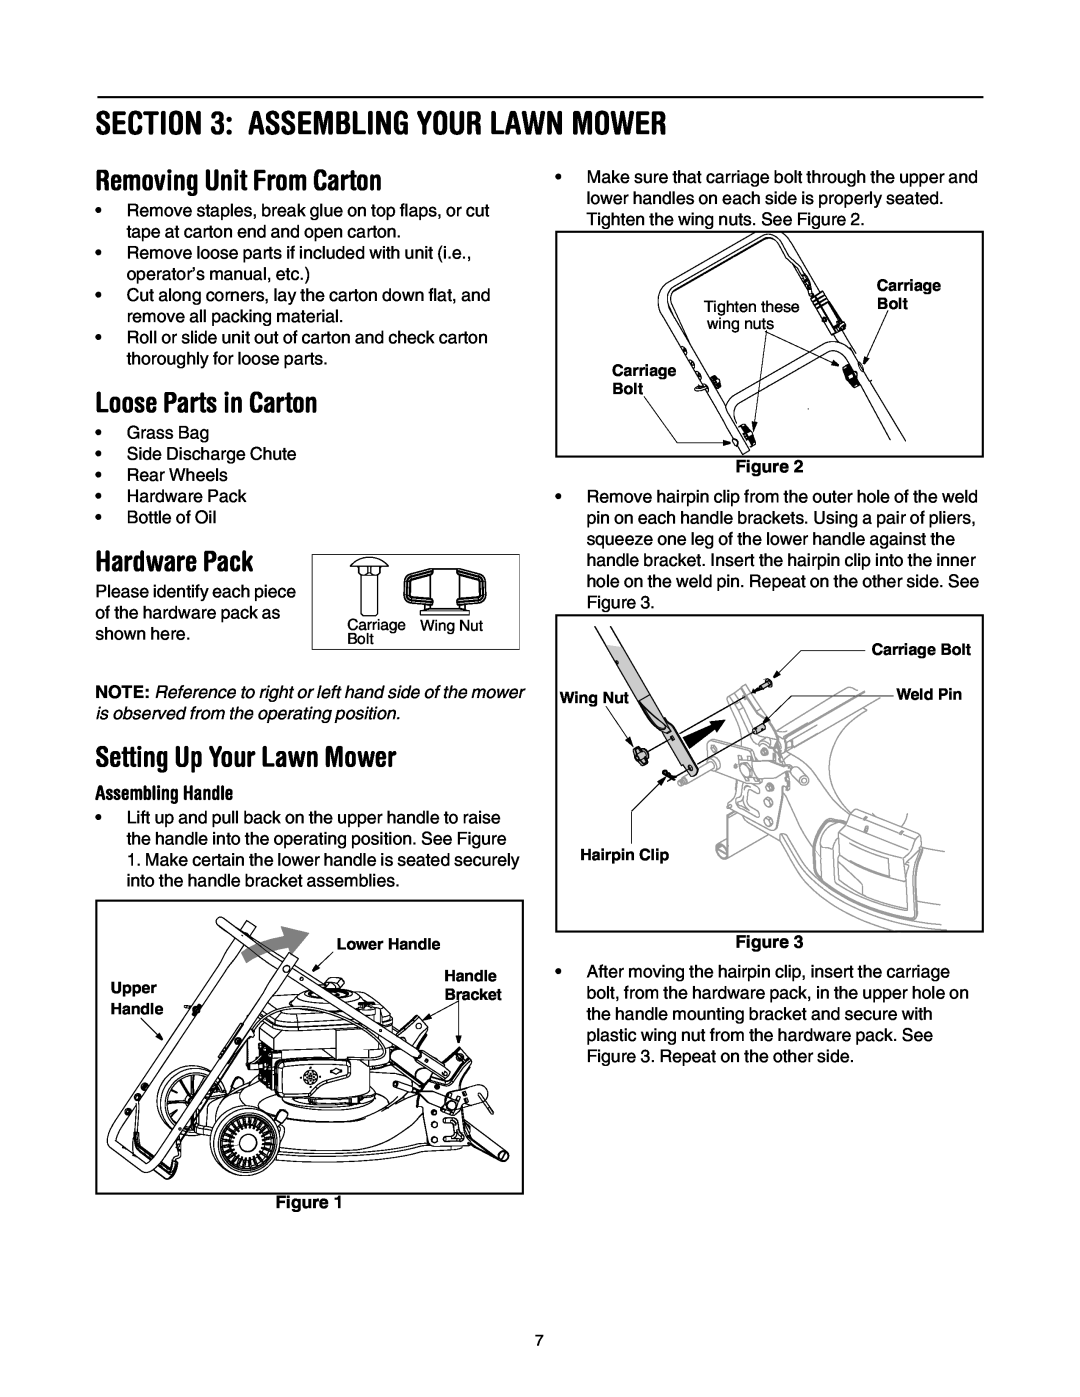 MTD 549 manual Assembling Your Lawn Mower, Removing Unit From Carton, Hardware Pack, Setting Up Your Lawn Mower 